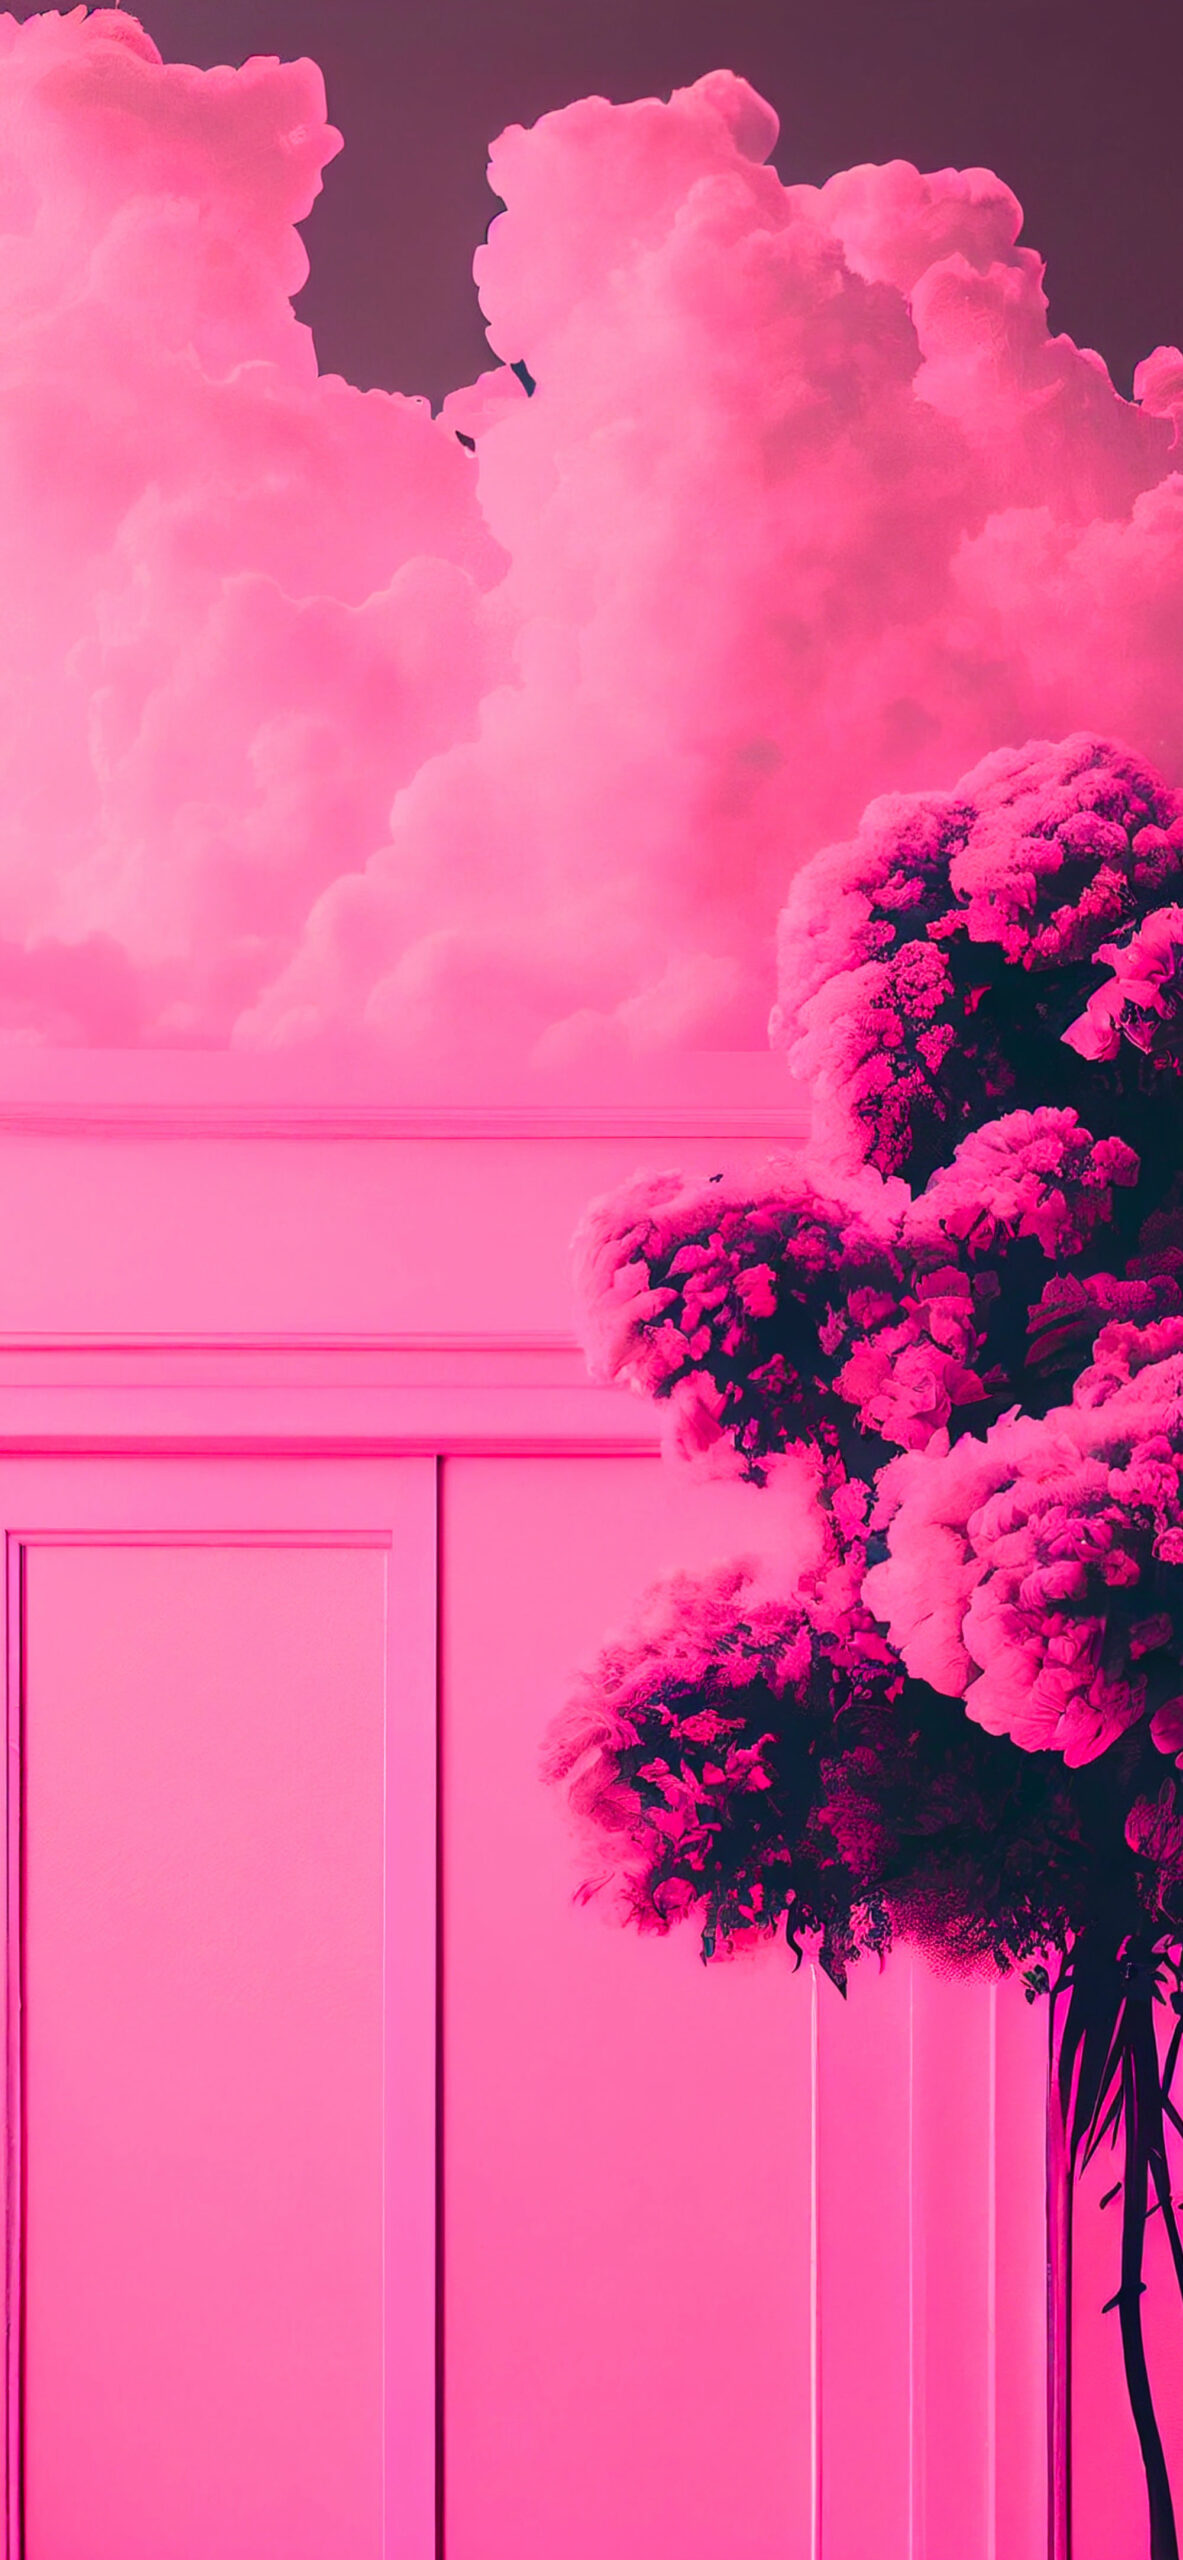 clouds wall and tree aesthetic pink wallpaper